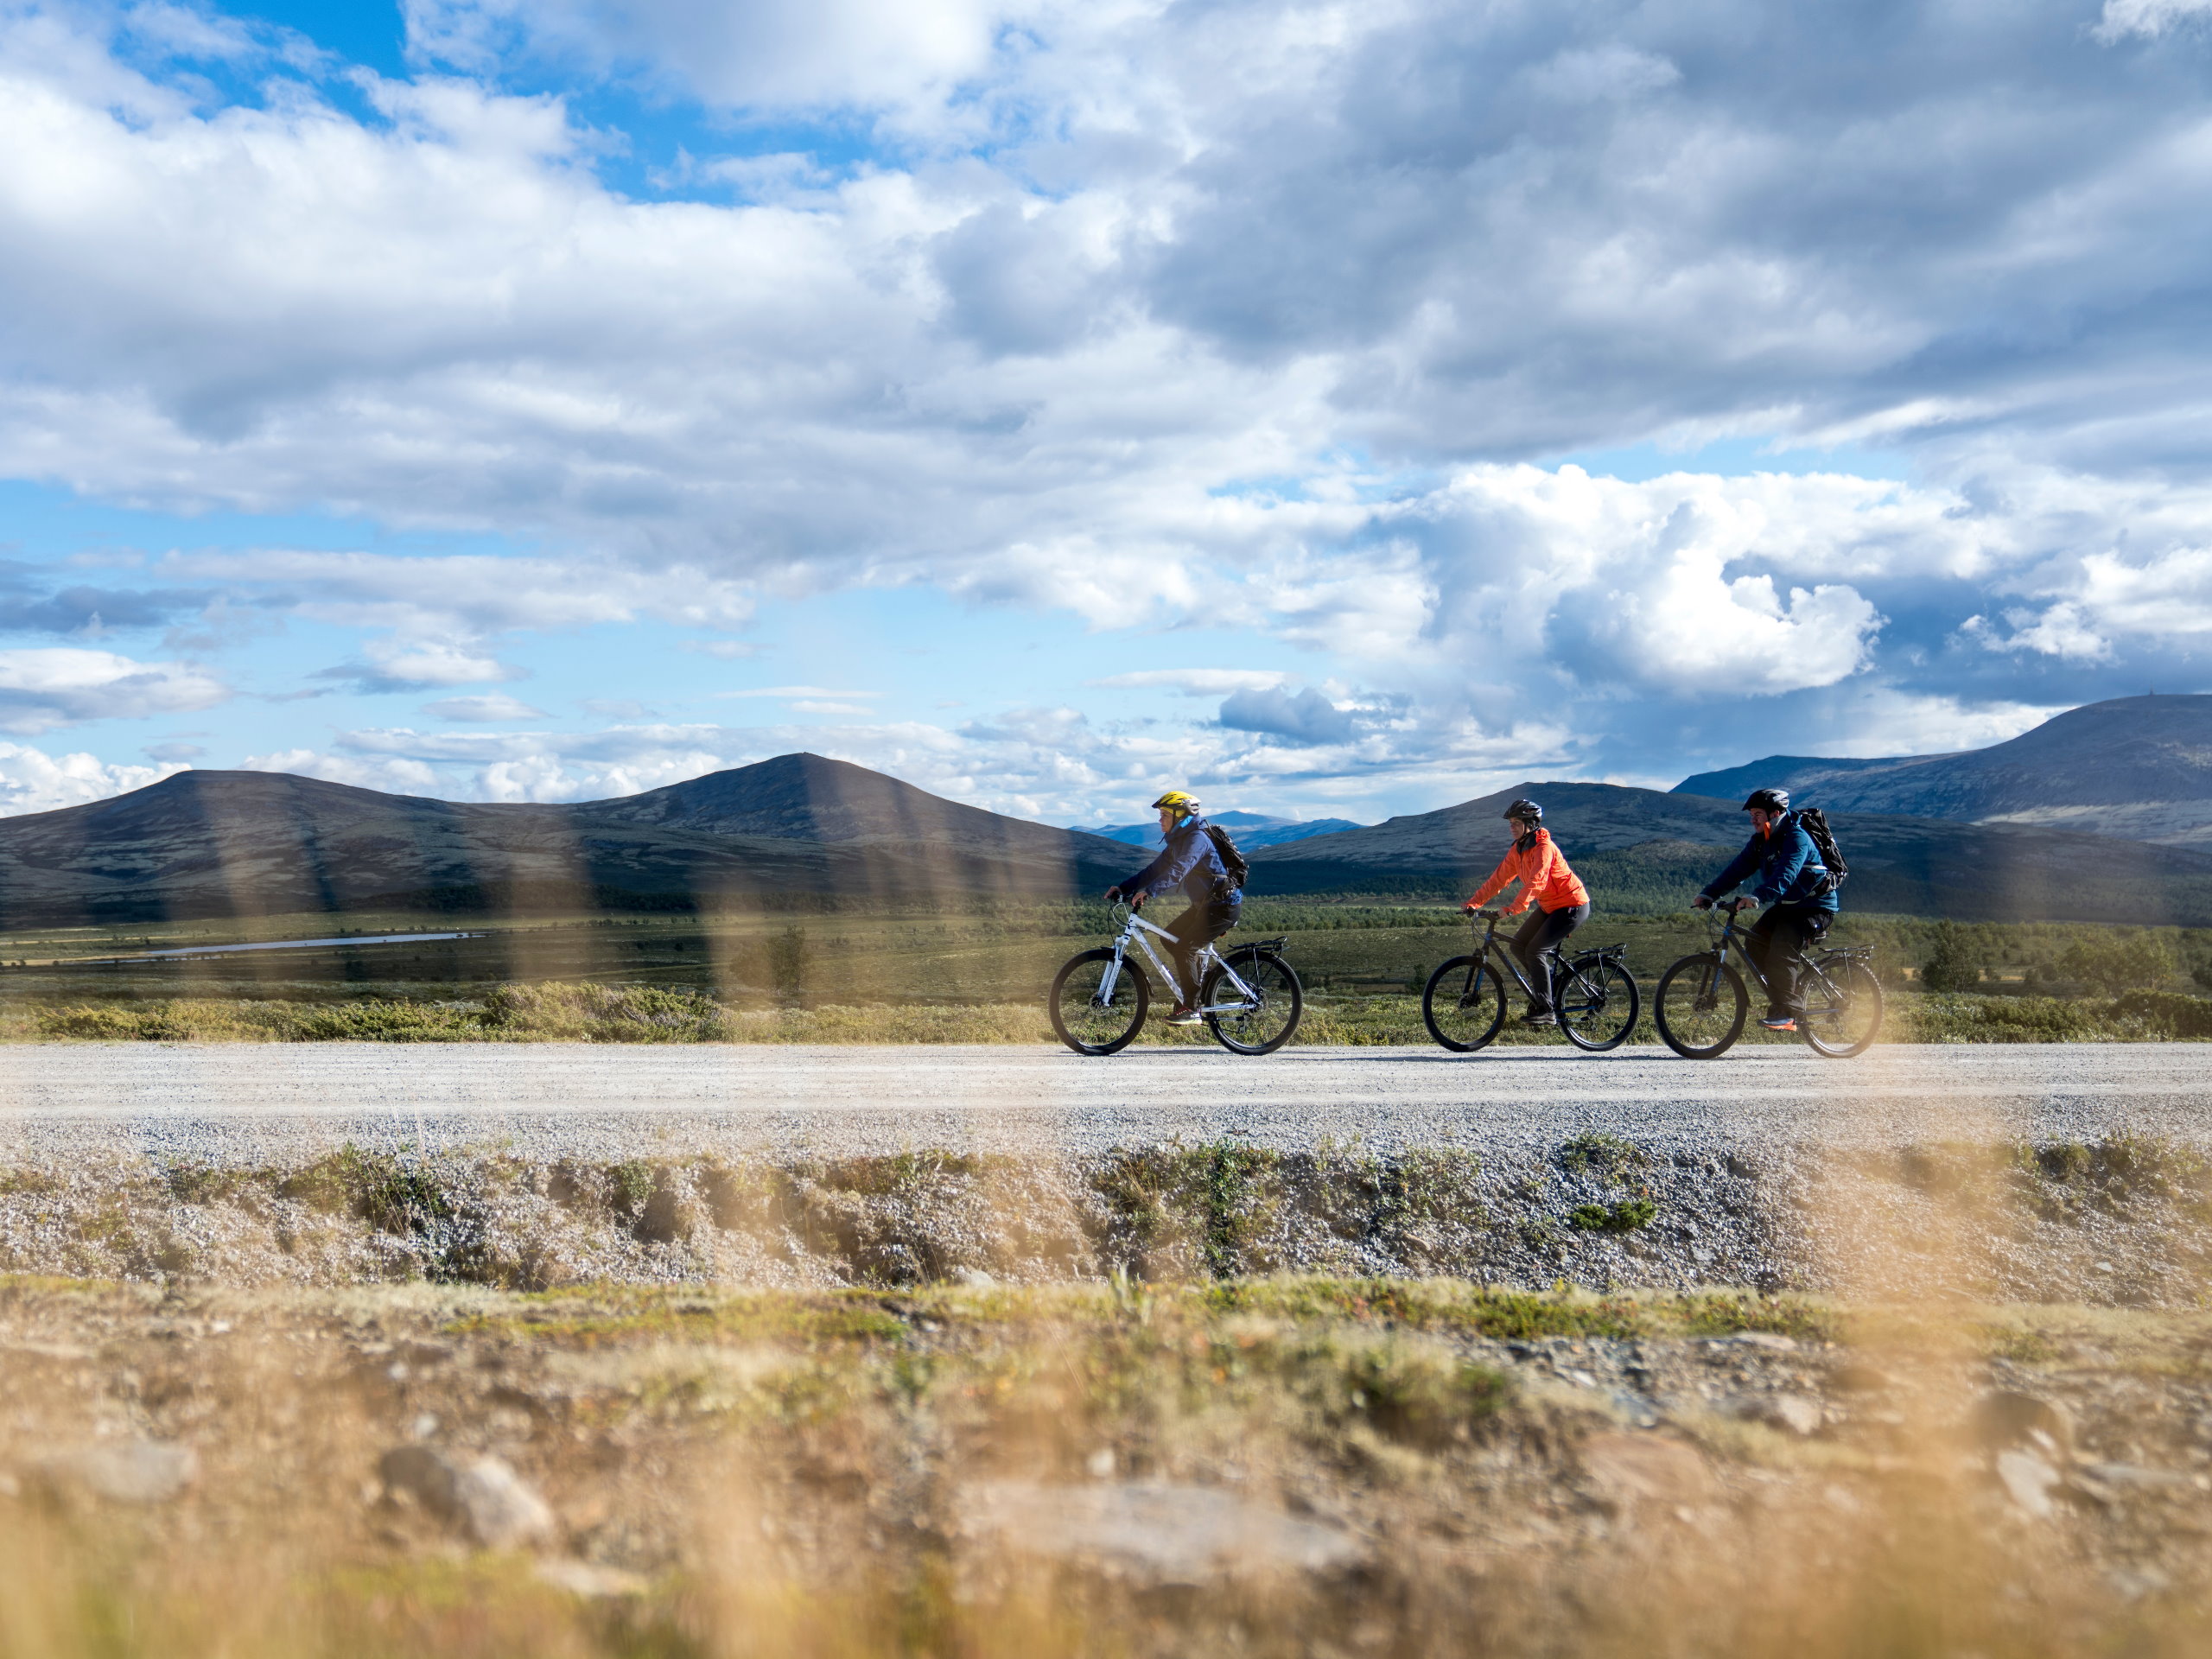 tour-de-dovre-national-park-bicycle-package-norway-by-bike